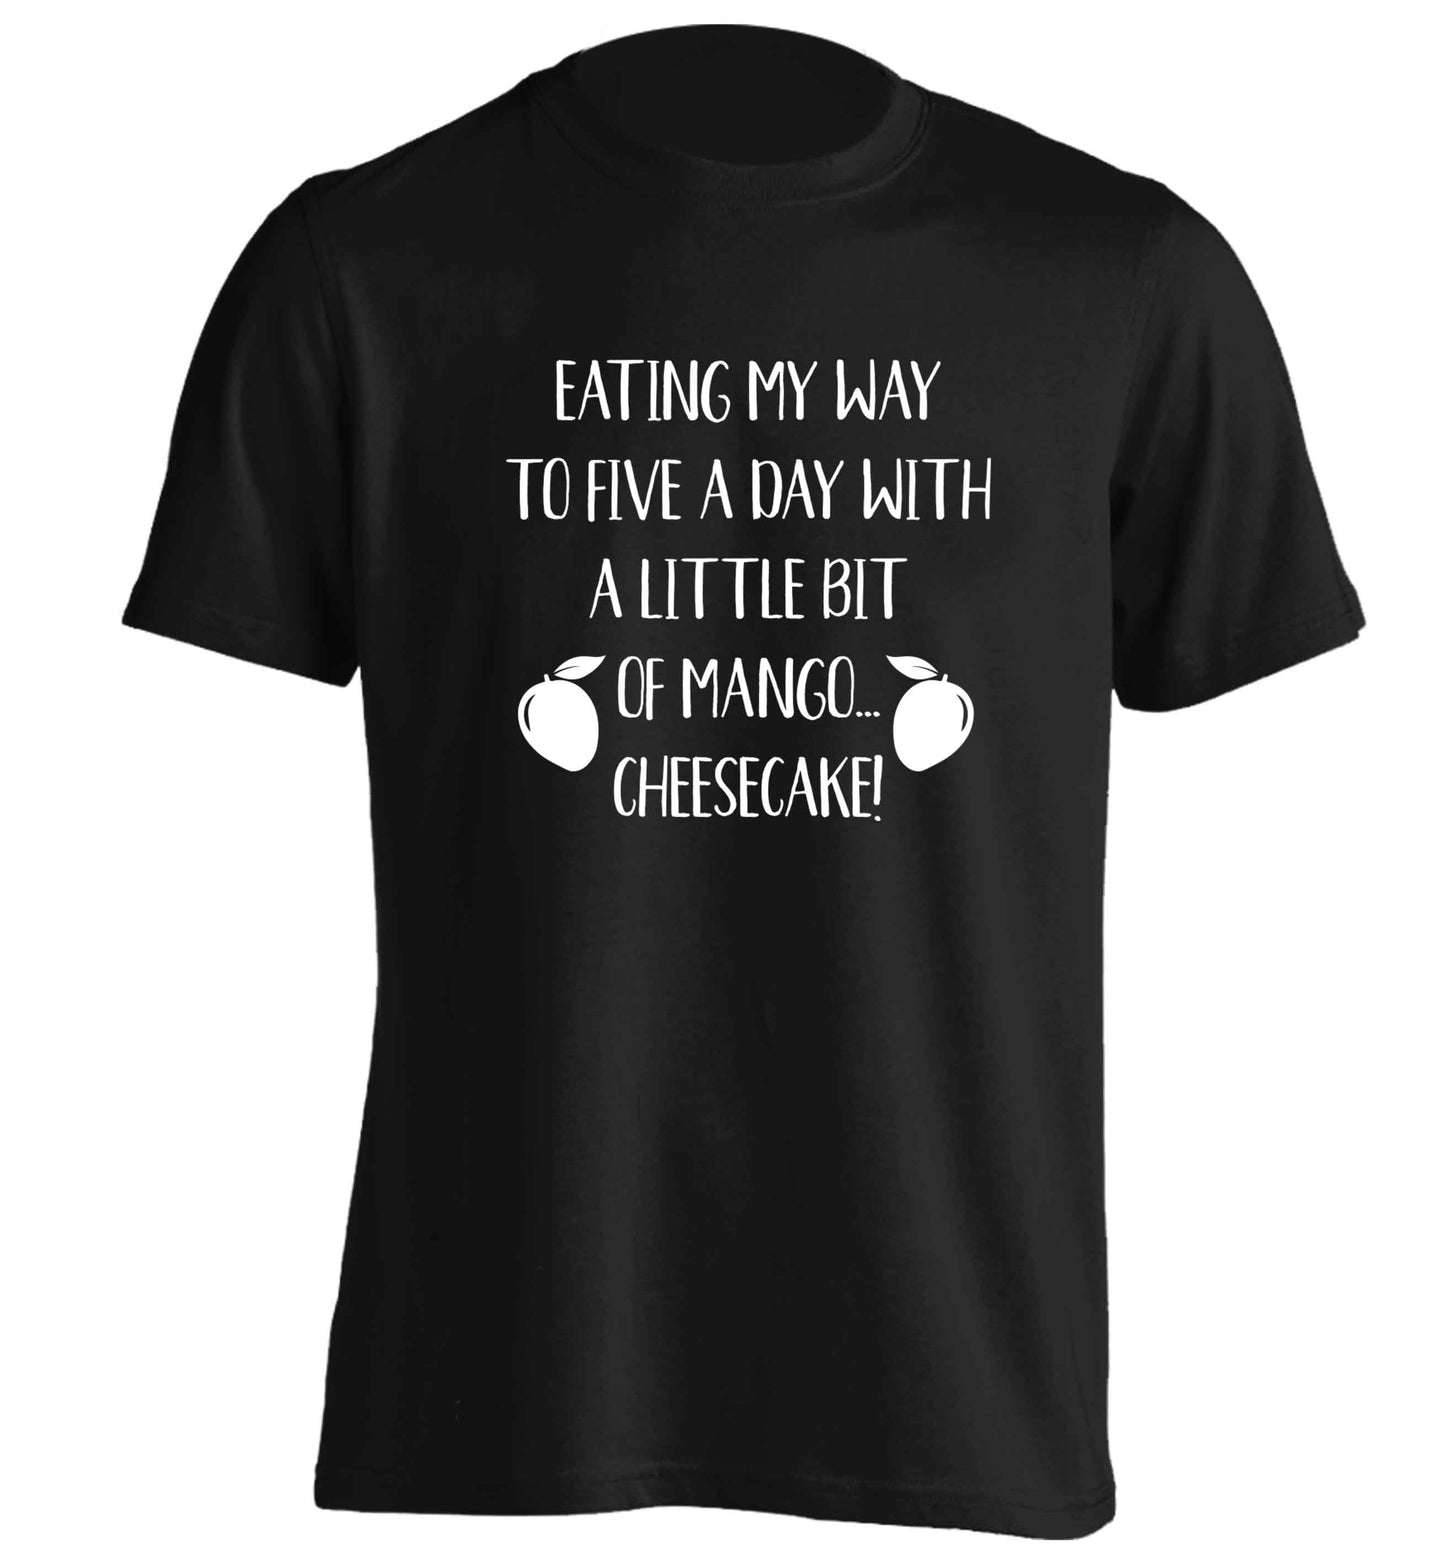 Eating my way to five a day with a little bit of mango cheesecake adults unisex black Tshirt 2XL